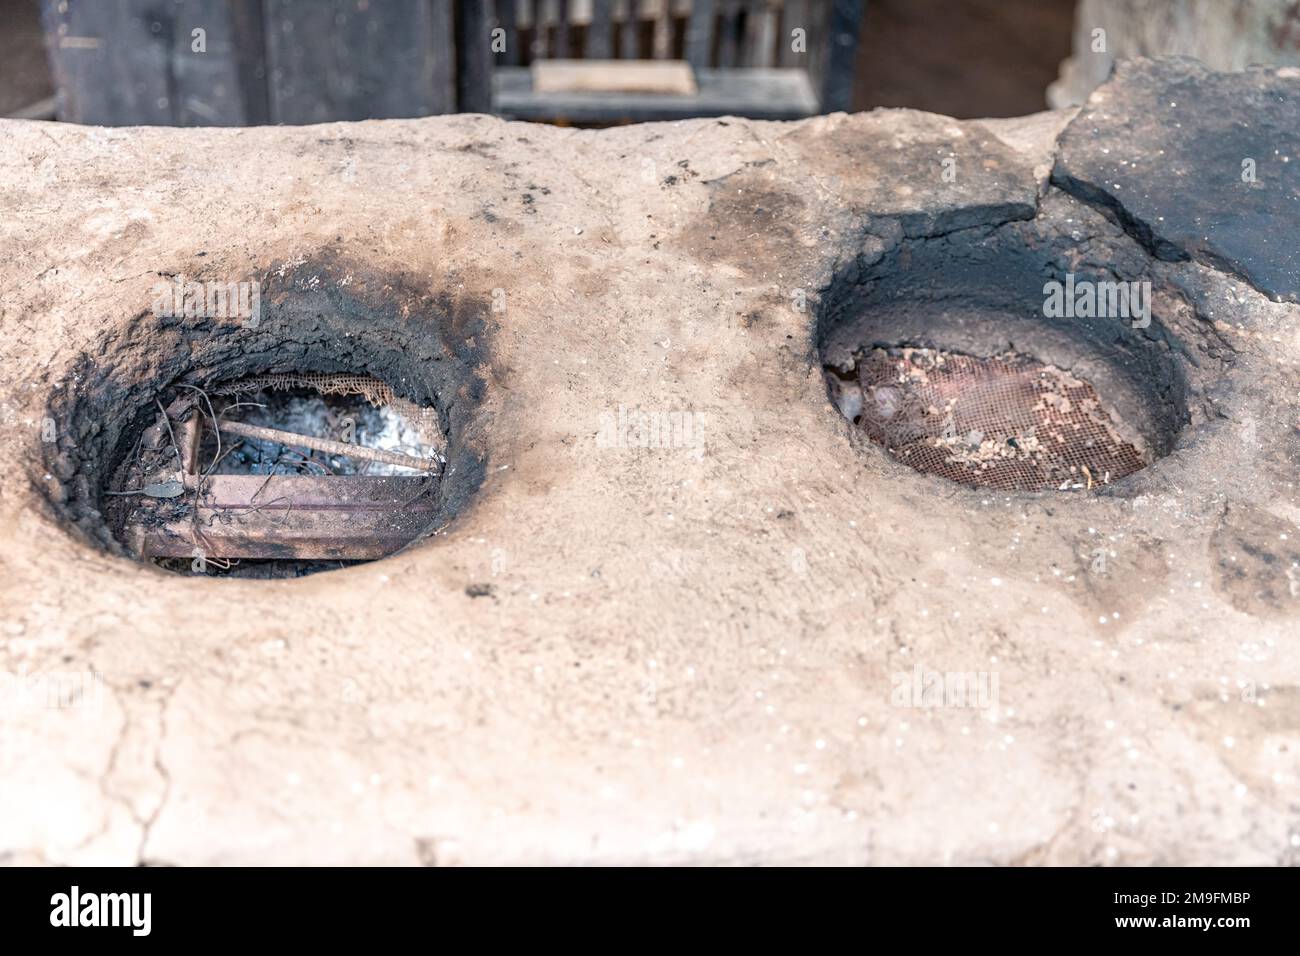 old clay oven in indian village Stock Photo